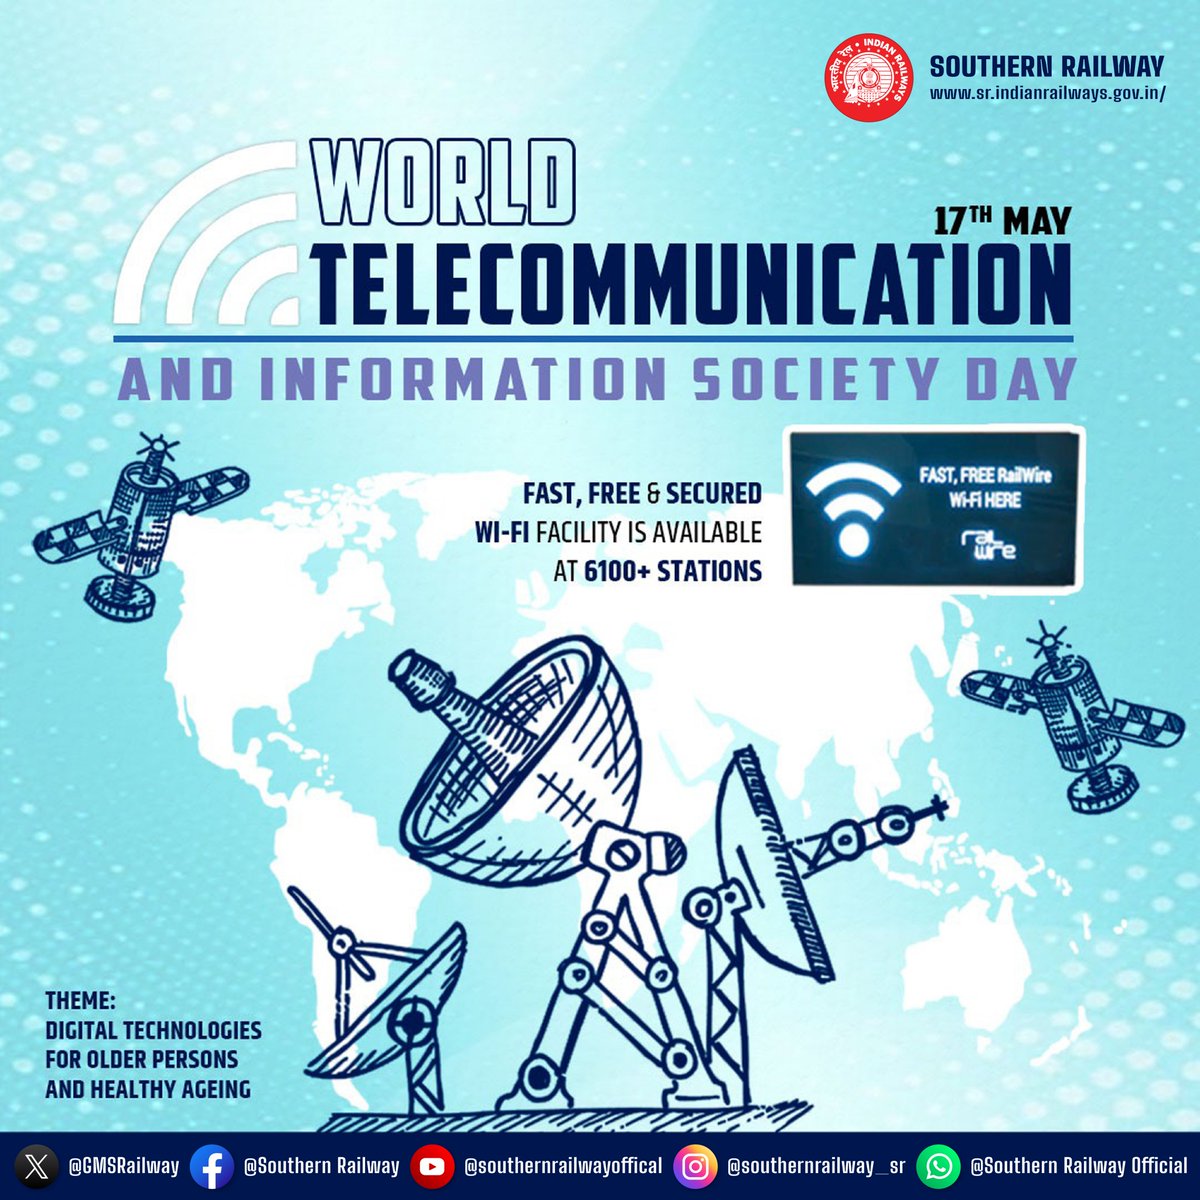 Happy World Telecommunication and Information Society Day! 🌐📡 Celebrating the power of the Internet and information and communication technologies (ICTs) in connecting people globally. #WorldTelecomDay #InformationSocietyDay